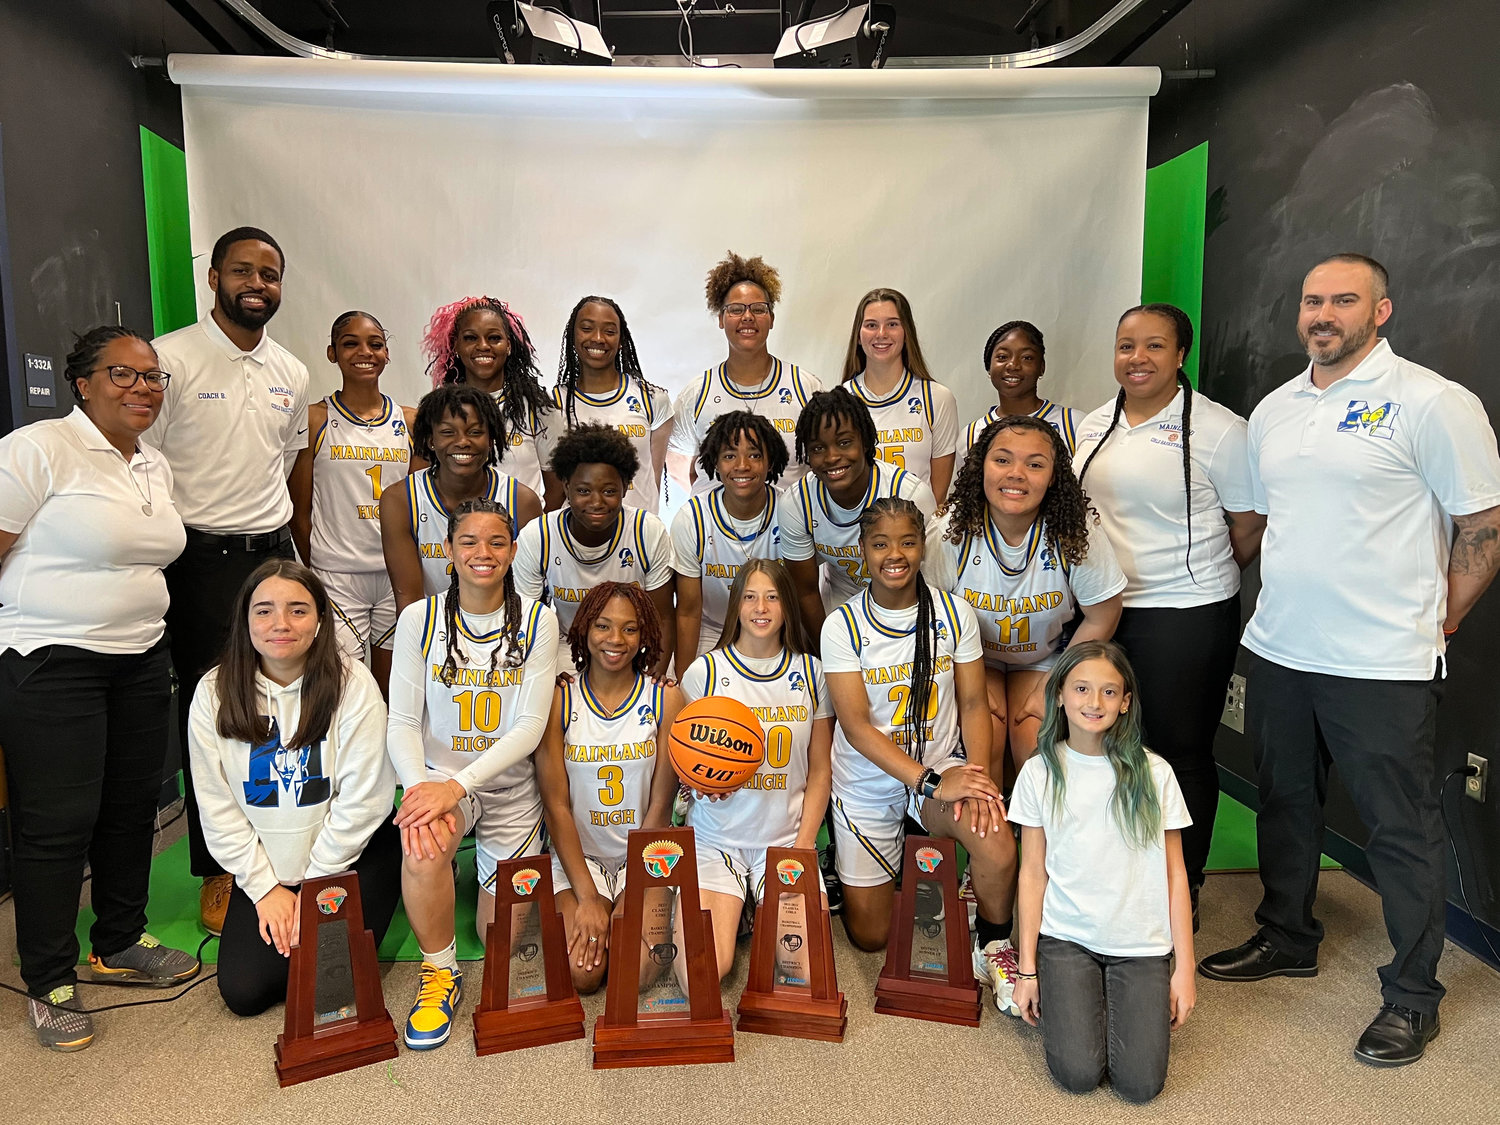 Coach Brandon Stewart (second from left) led the Mainland High School girls' basketball team to a state championship this past season.